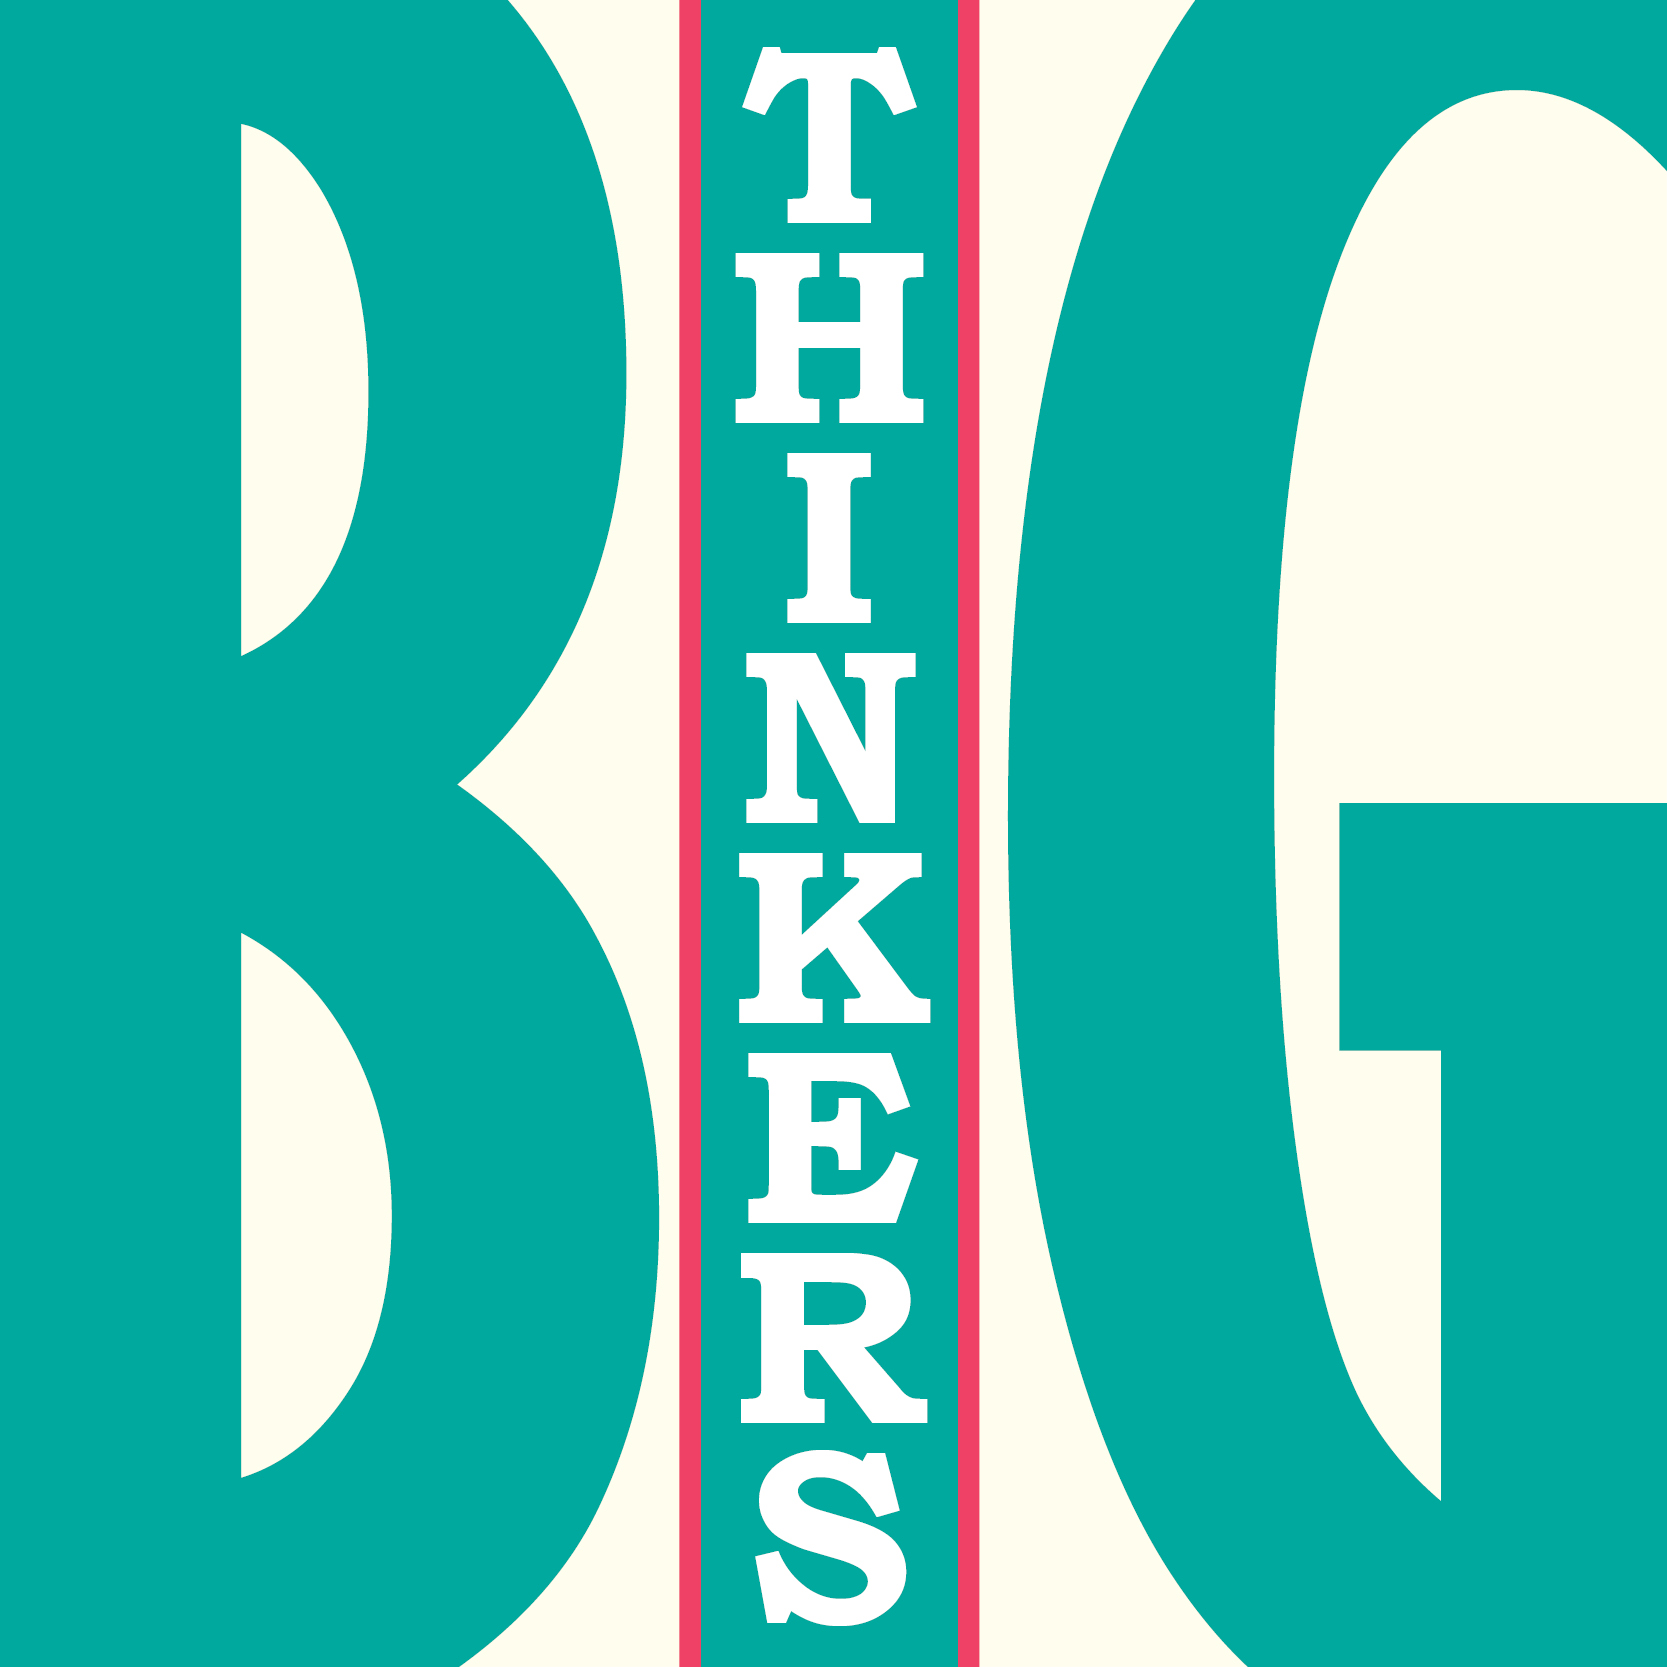 Big Thinkers at Lake Forest Library